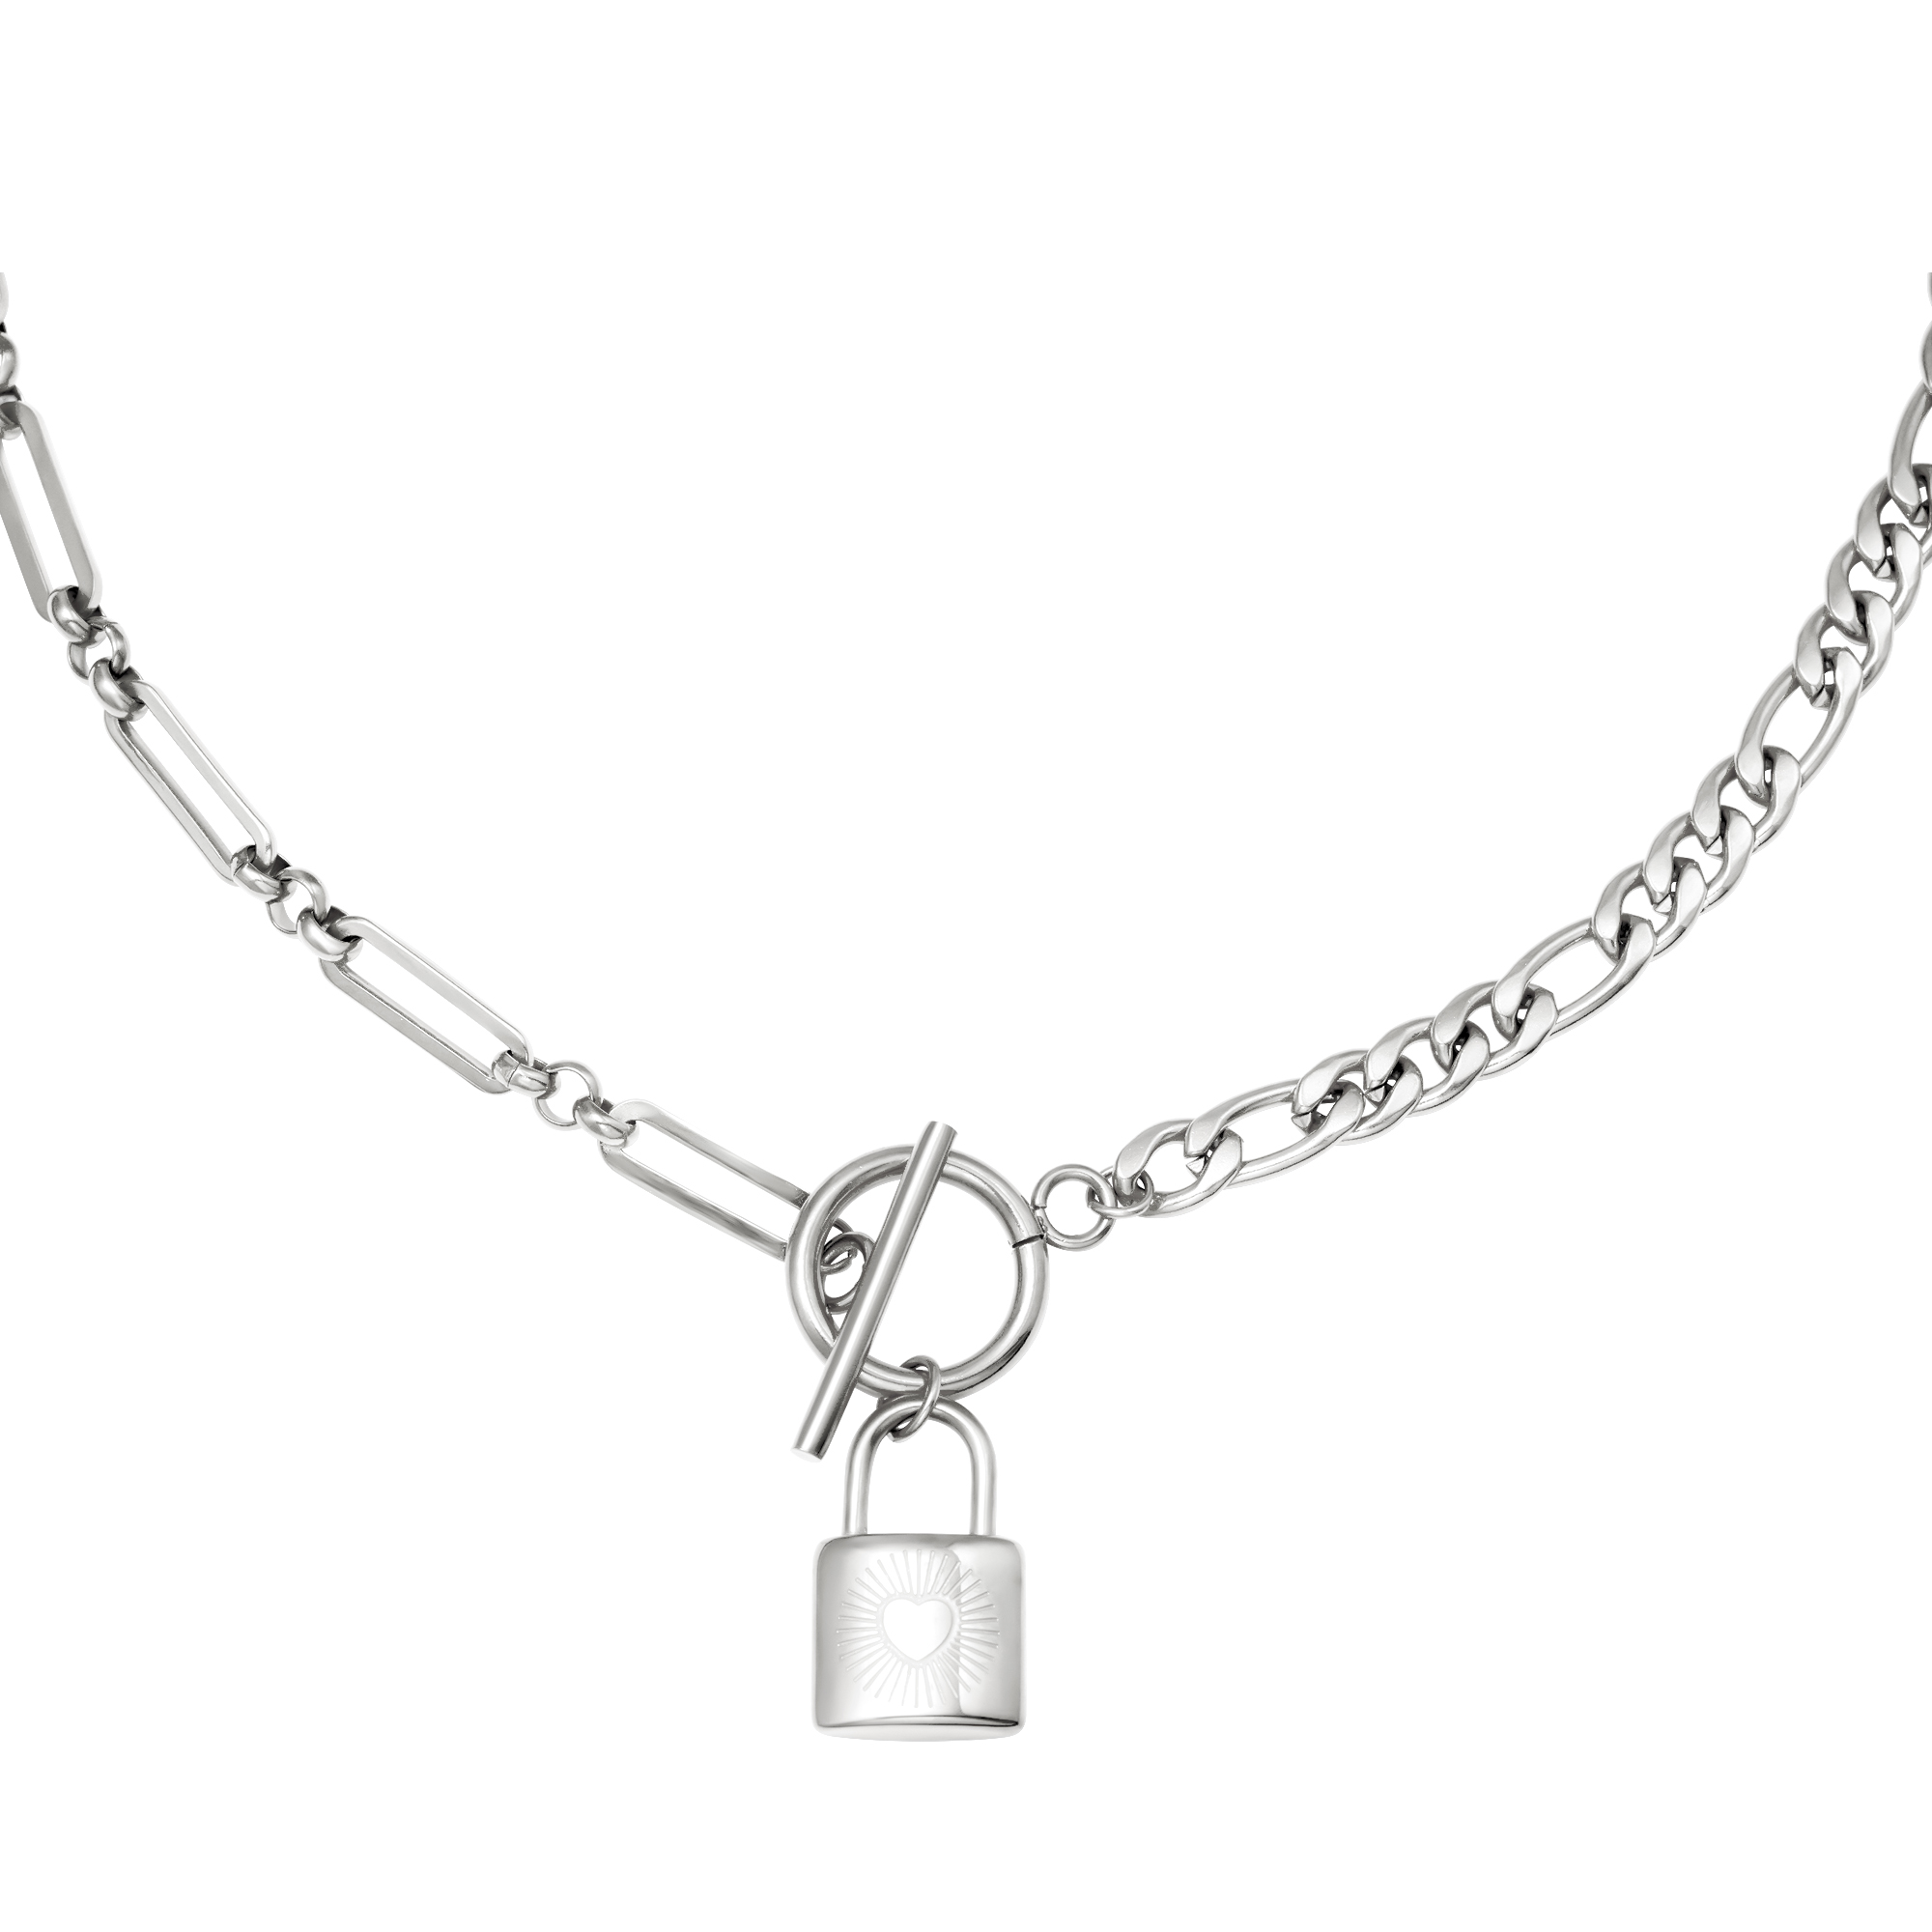 Necklace Chain &amp; Lock